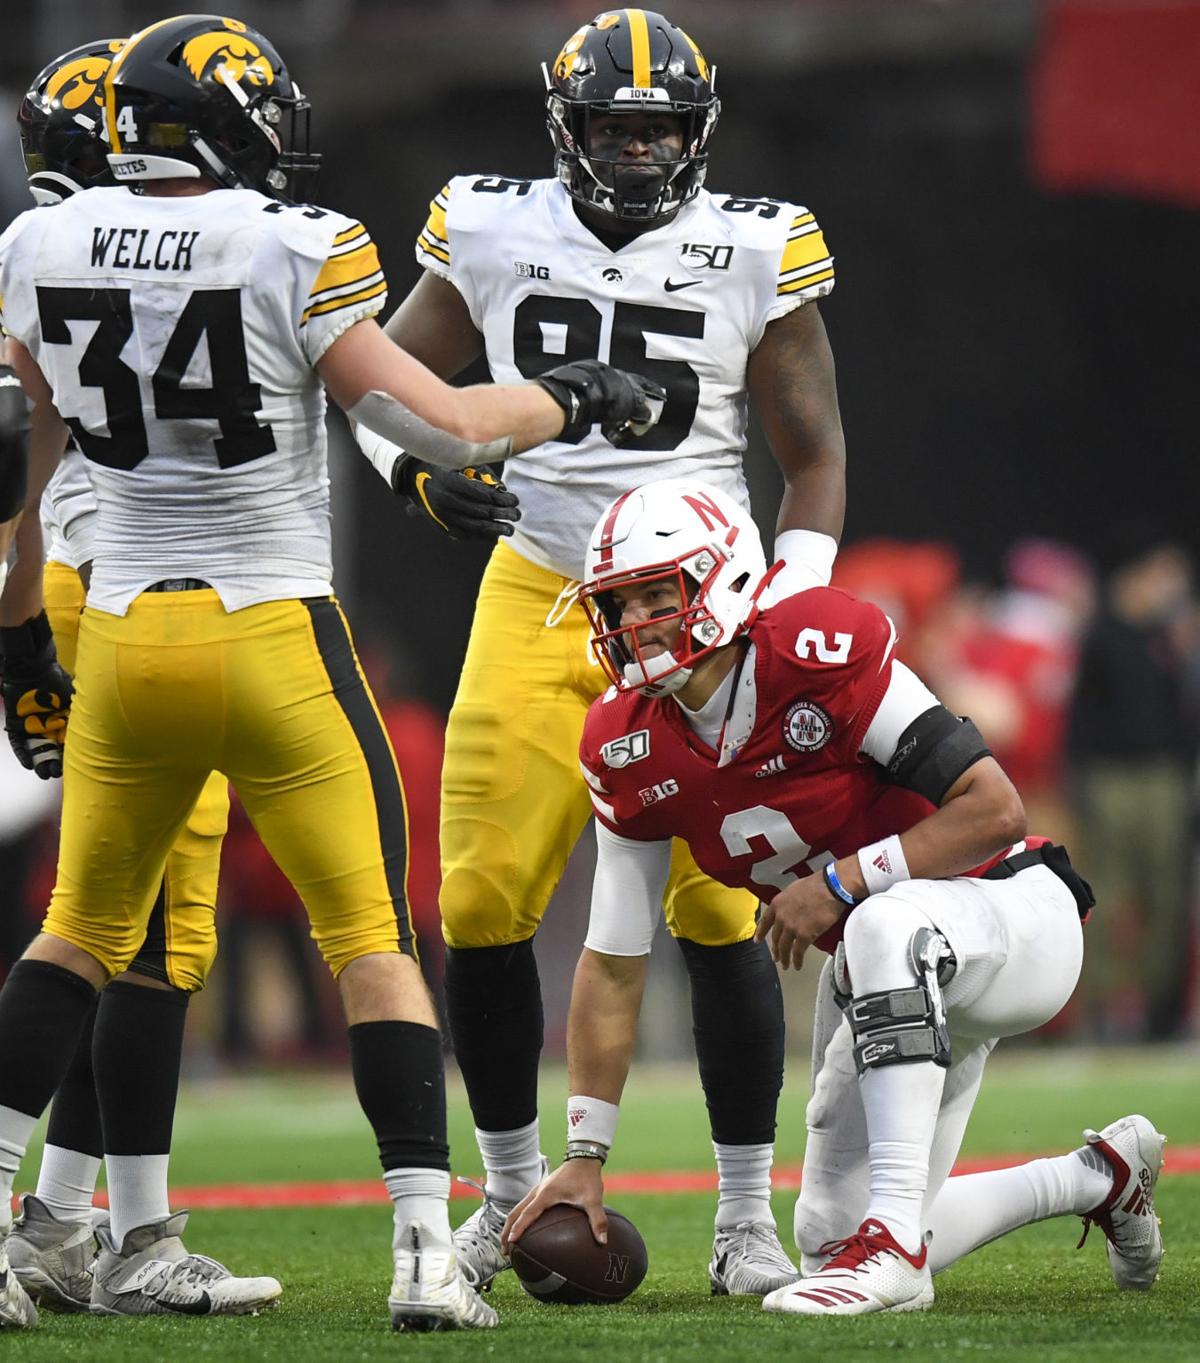 Huskers Fall On Late Field Goal To Iowa For Second Straight